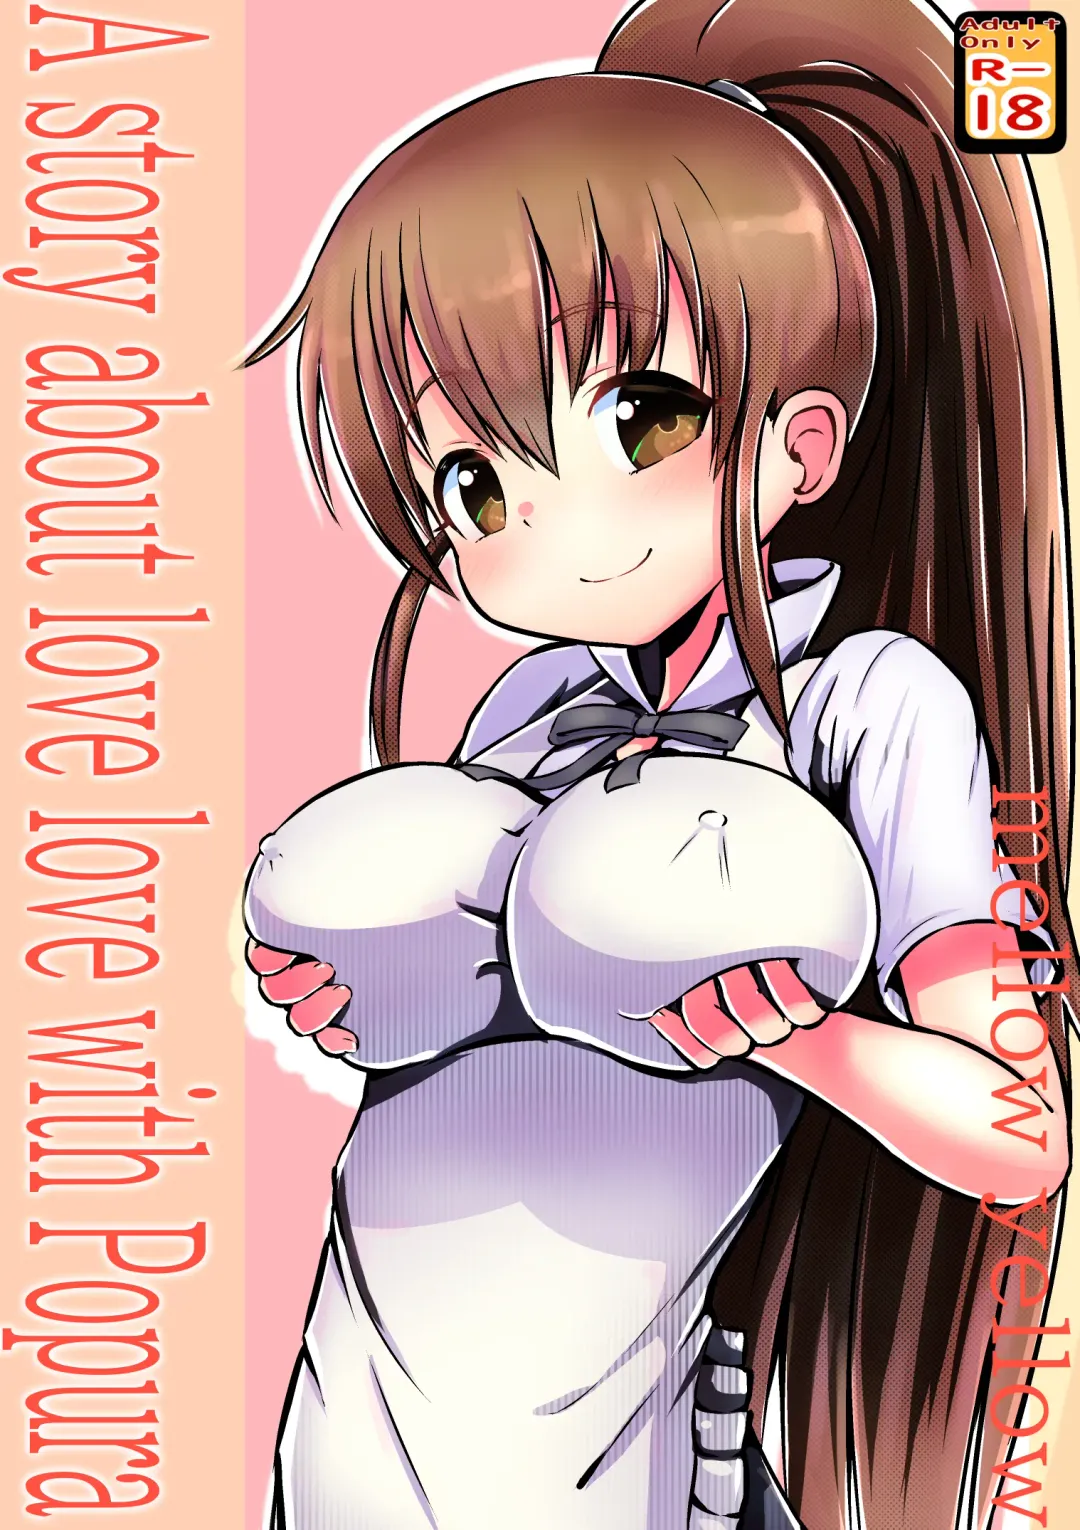 Read A story about love love with Popura - Fhentai.net